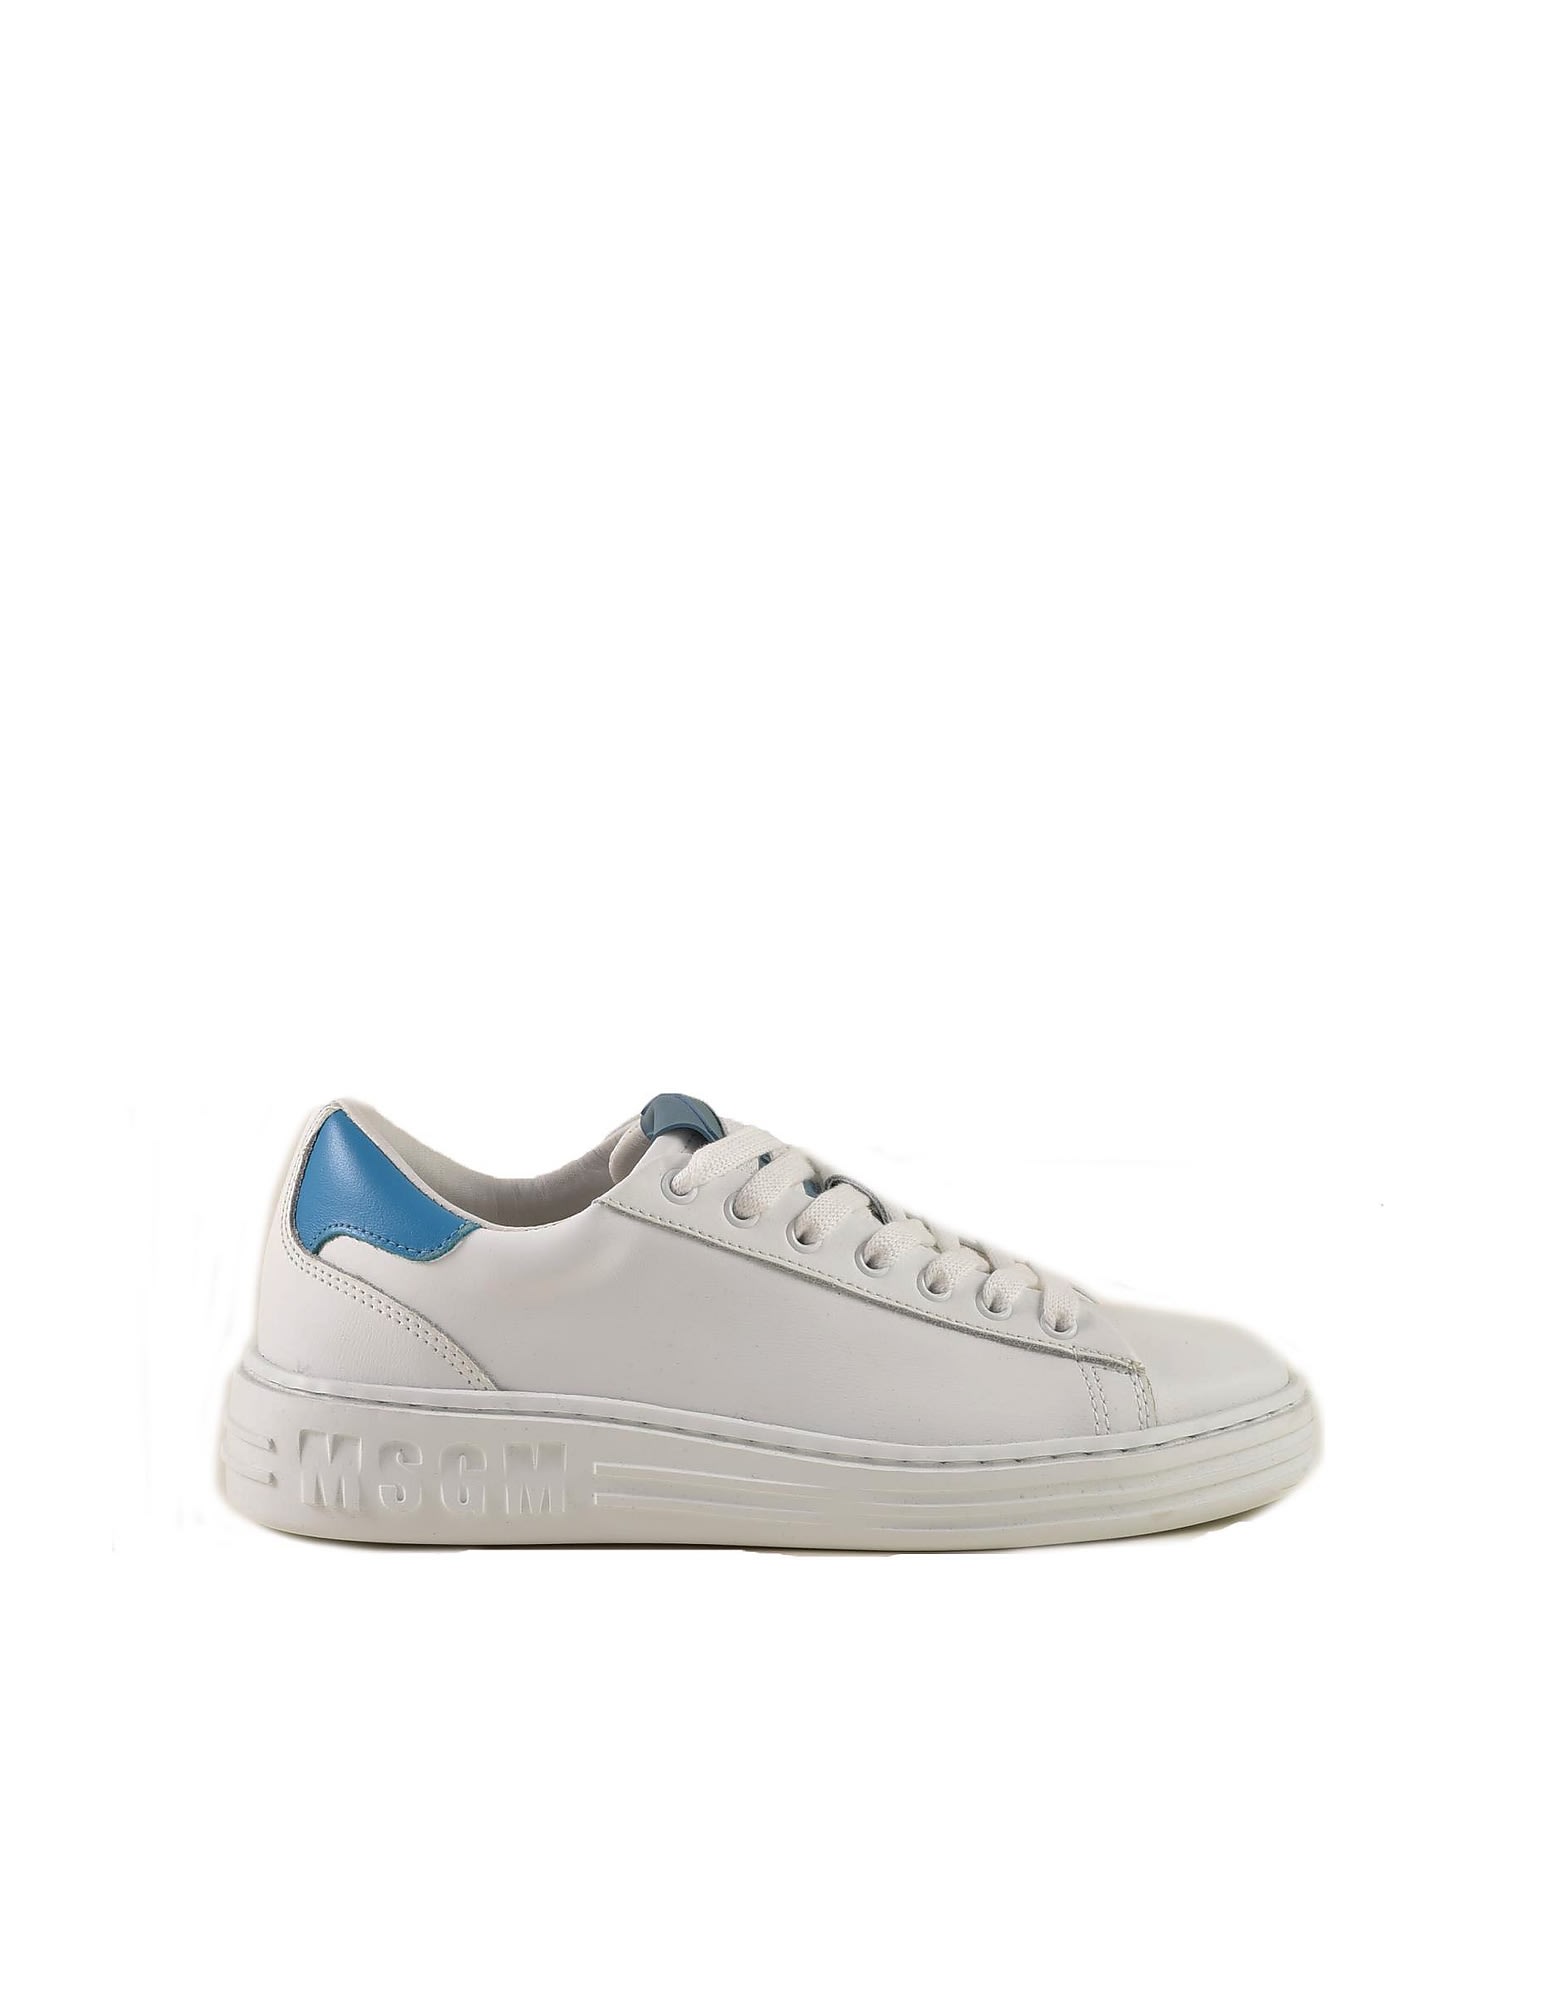 MSGM Womens Turquoise Sneakers